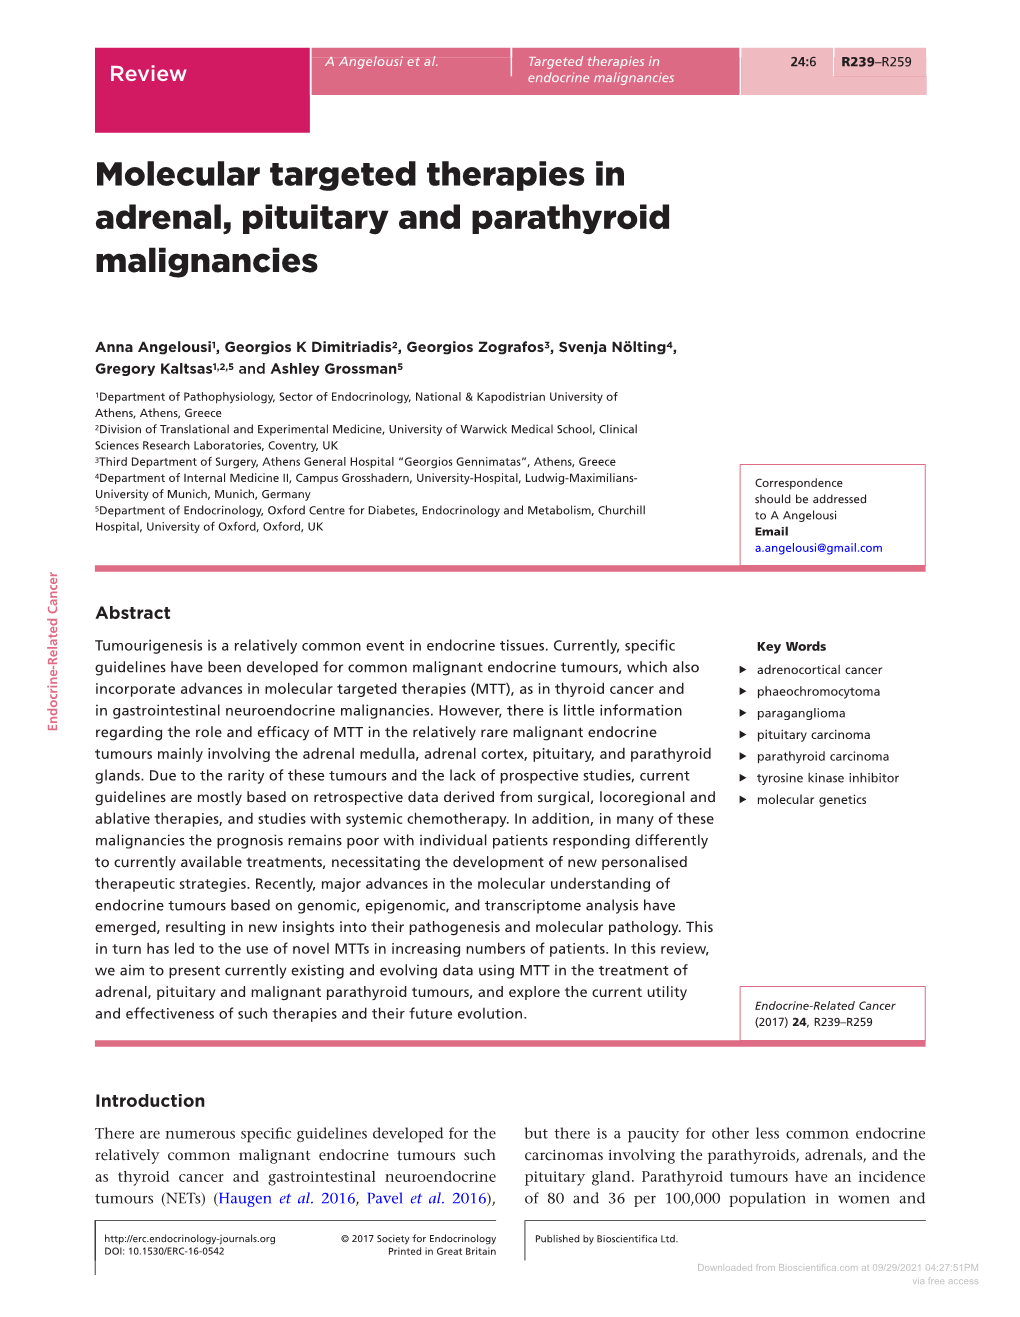 Molecular Targeted Therapies in Adrenal, Pituitary and Parathyroid Malignancies